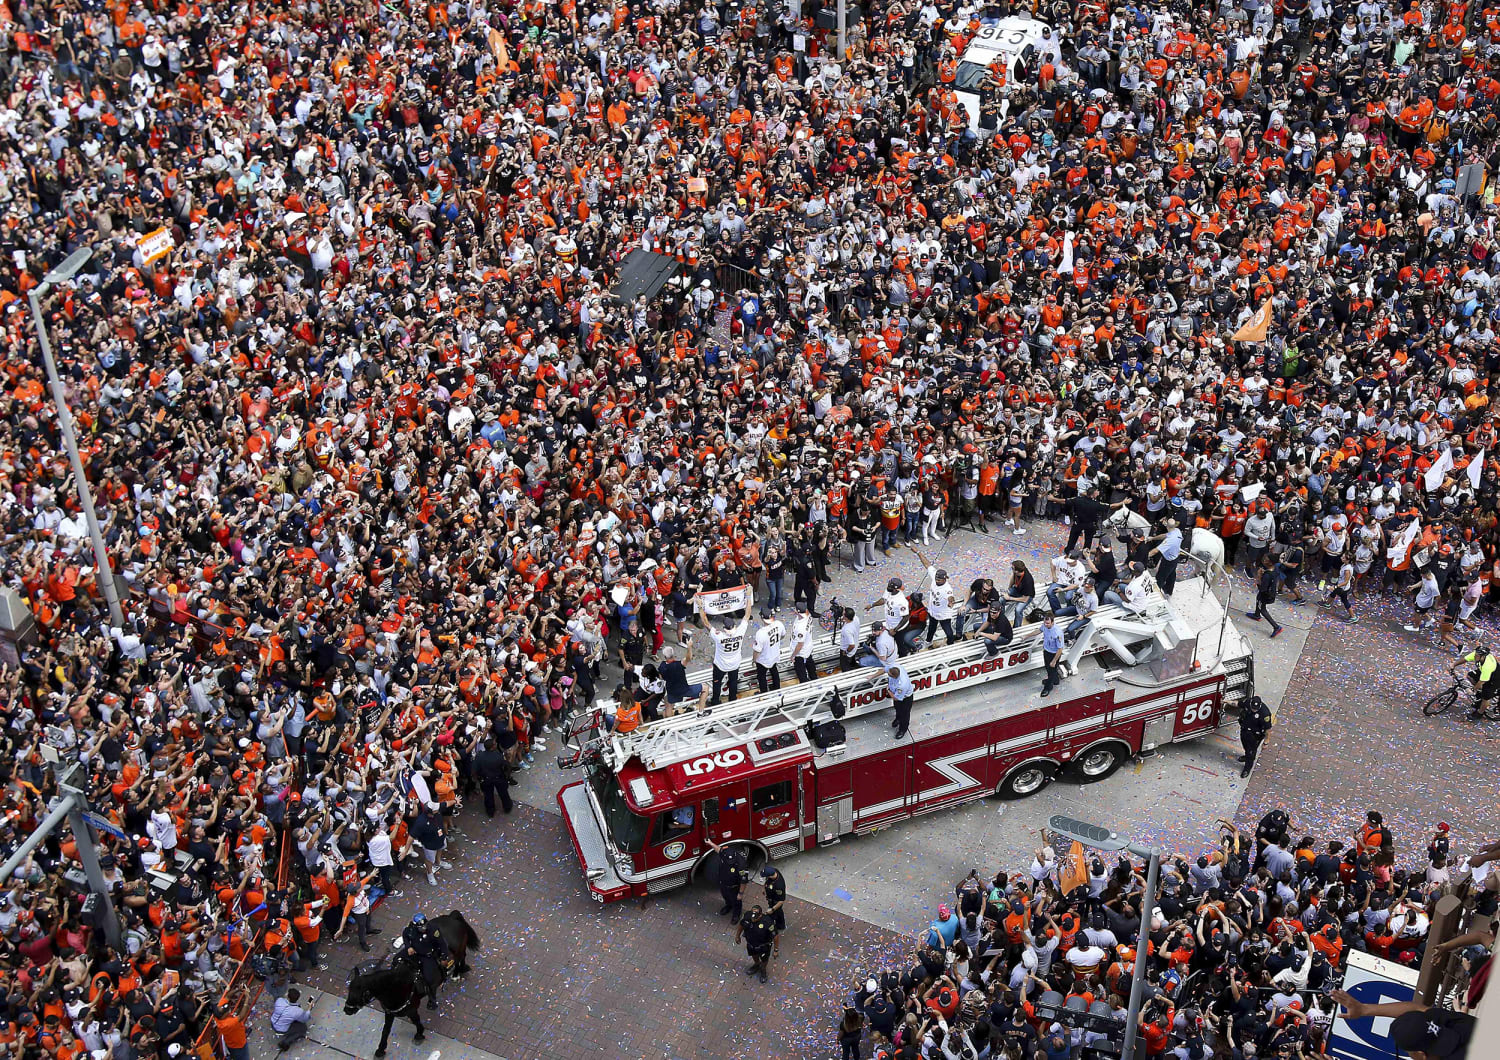 Over a million attend Astros World Series victory parade in